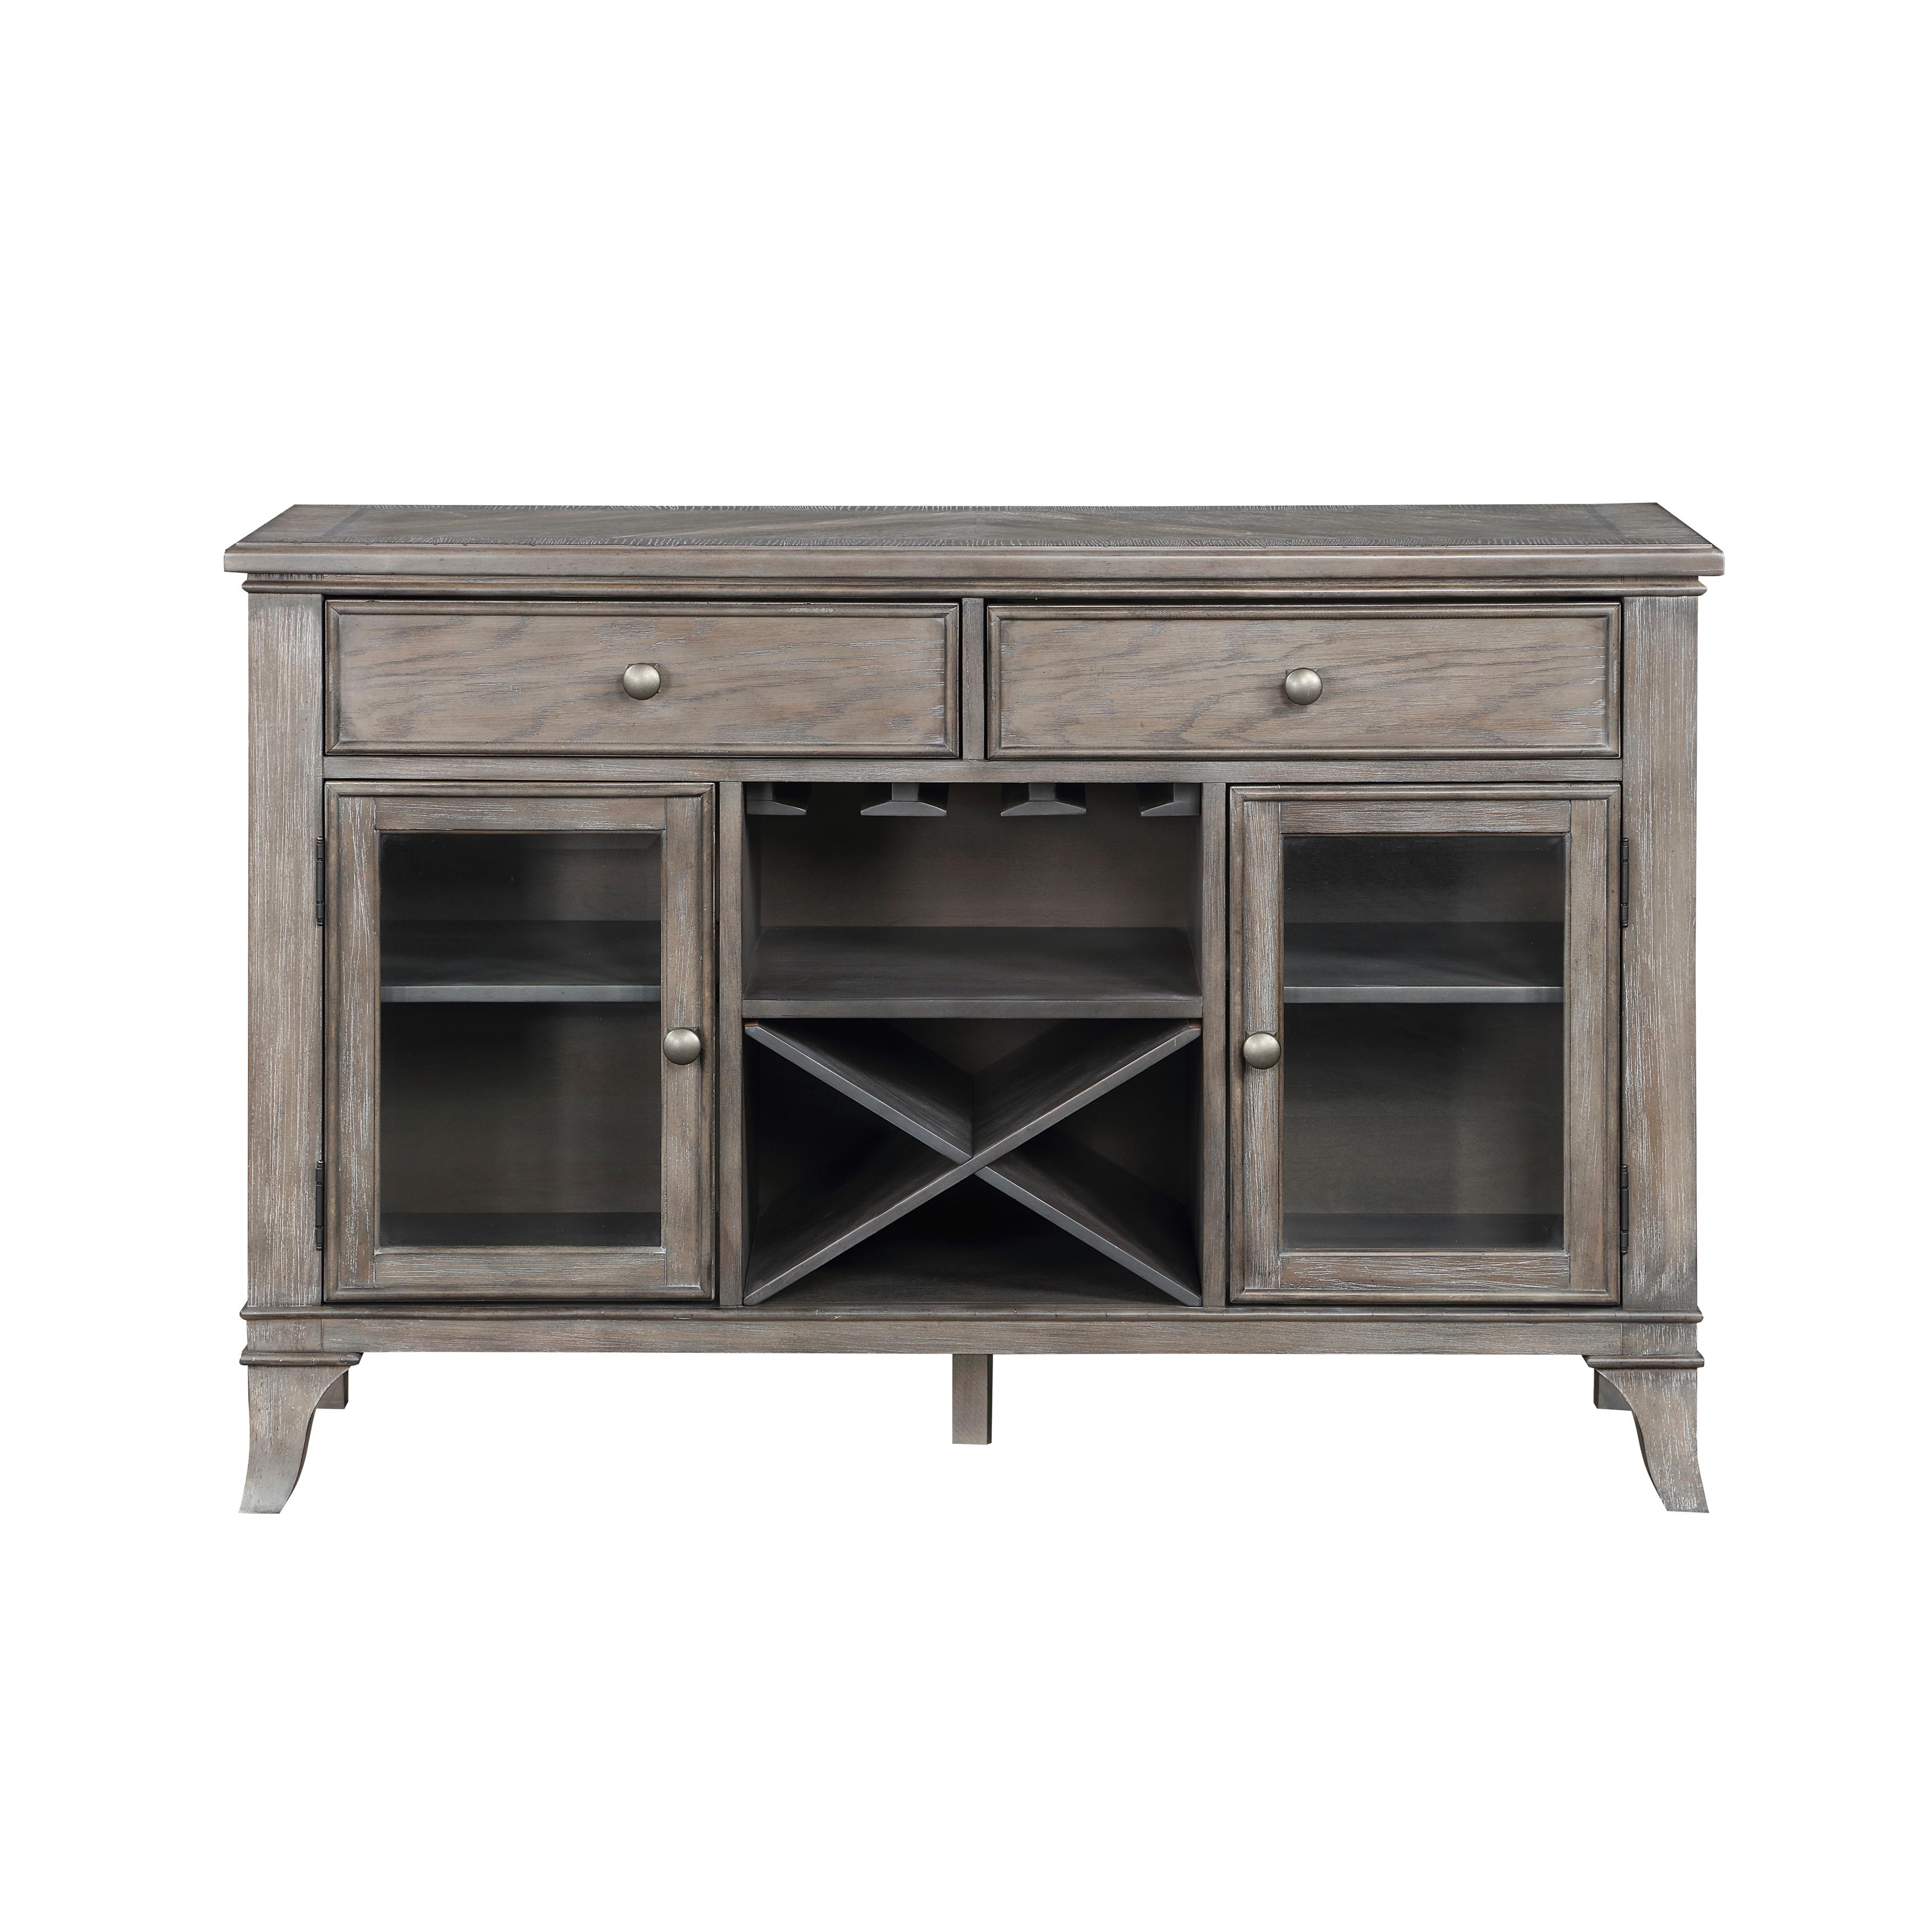 Traditional Server Garner Collection Server 5827-40-S 5827-40-S in Gray, Brown 